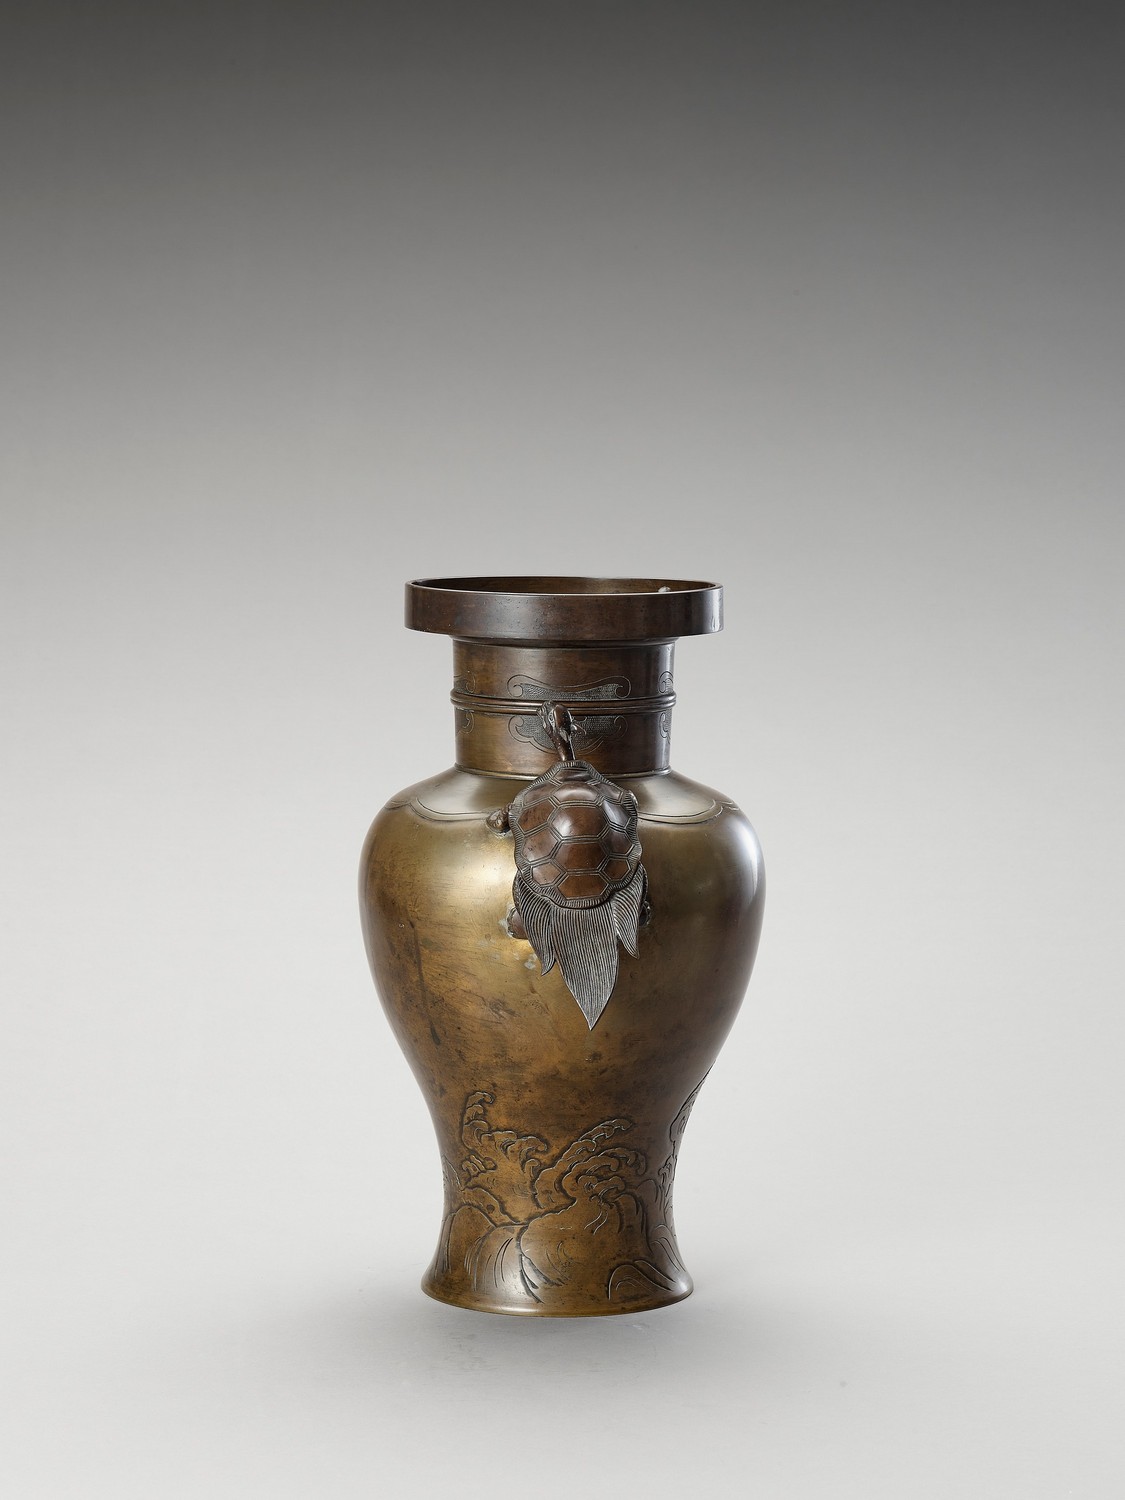 A BRONZE BALUSTER VASE WITH MINOGAME AND WAVES - Image 5 of 8